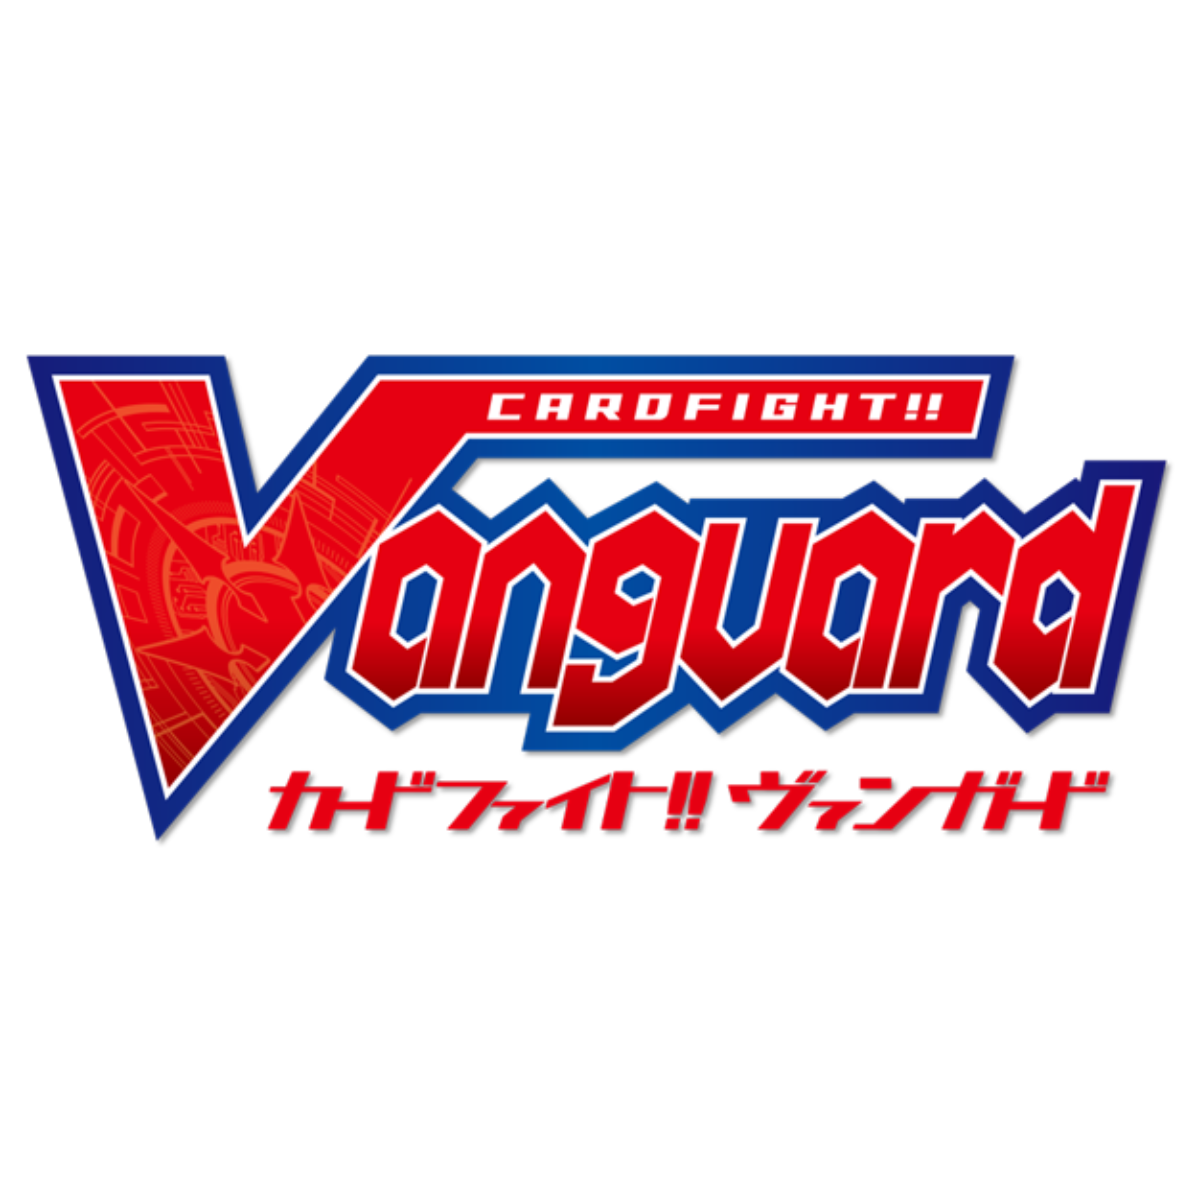 Bushiroad Deck Holder Collection -Card Fight!! Vanguard- &quot;Absolute Zero Sagitta&quot; (Vol.813)-Bushiroad-Ace Cards &amp; Collectibles